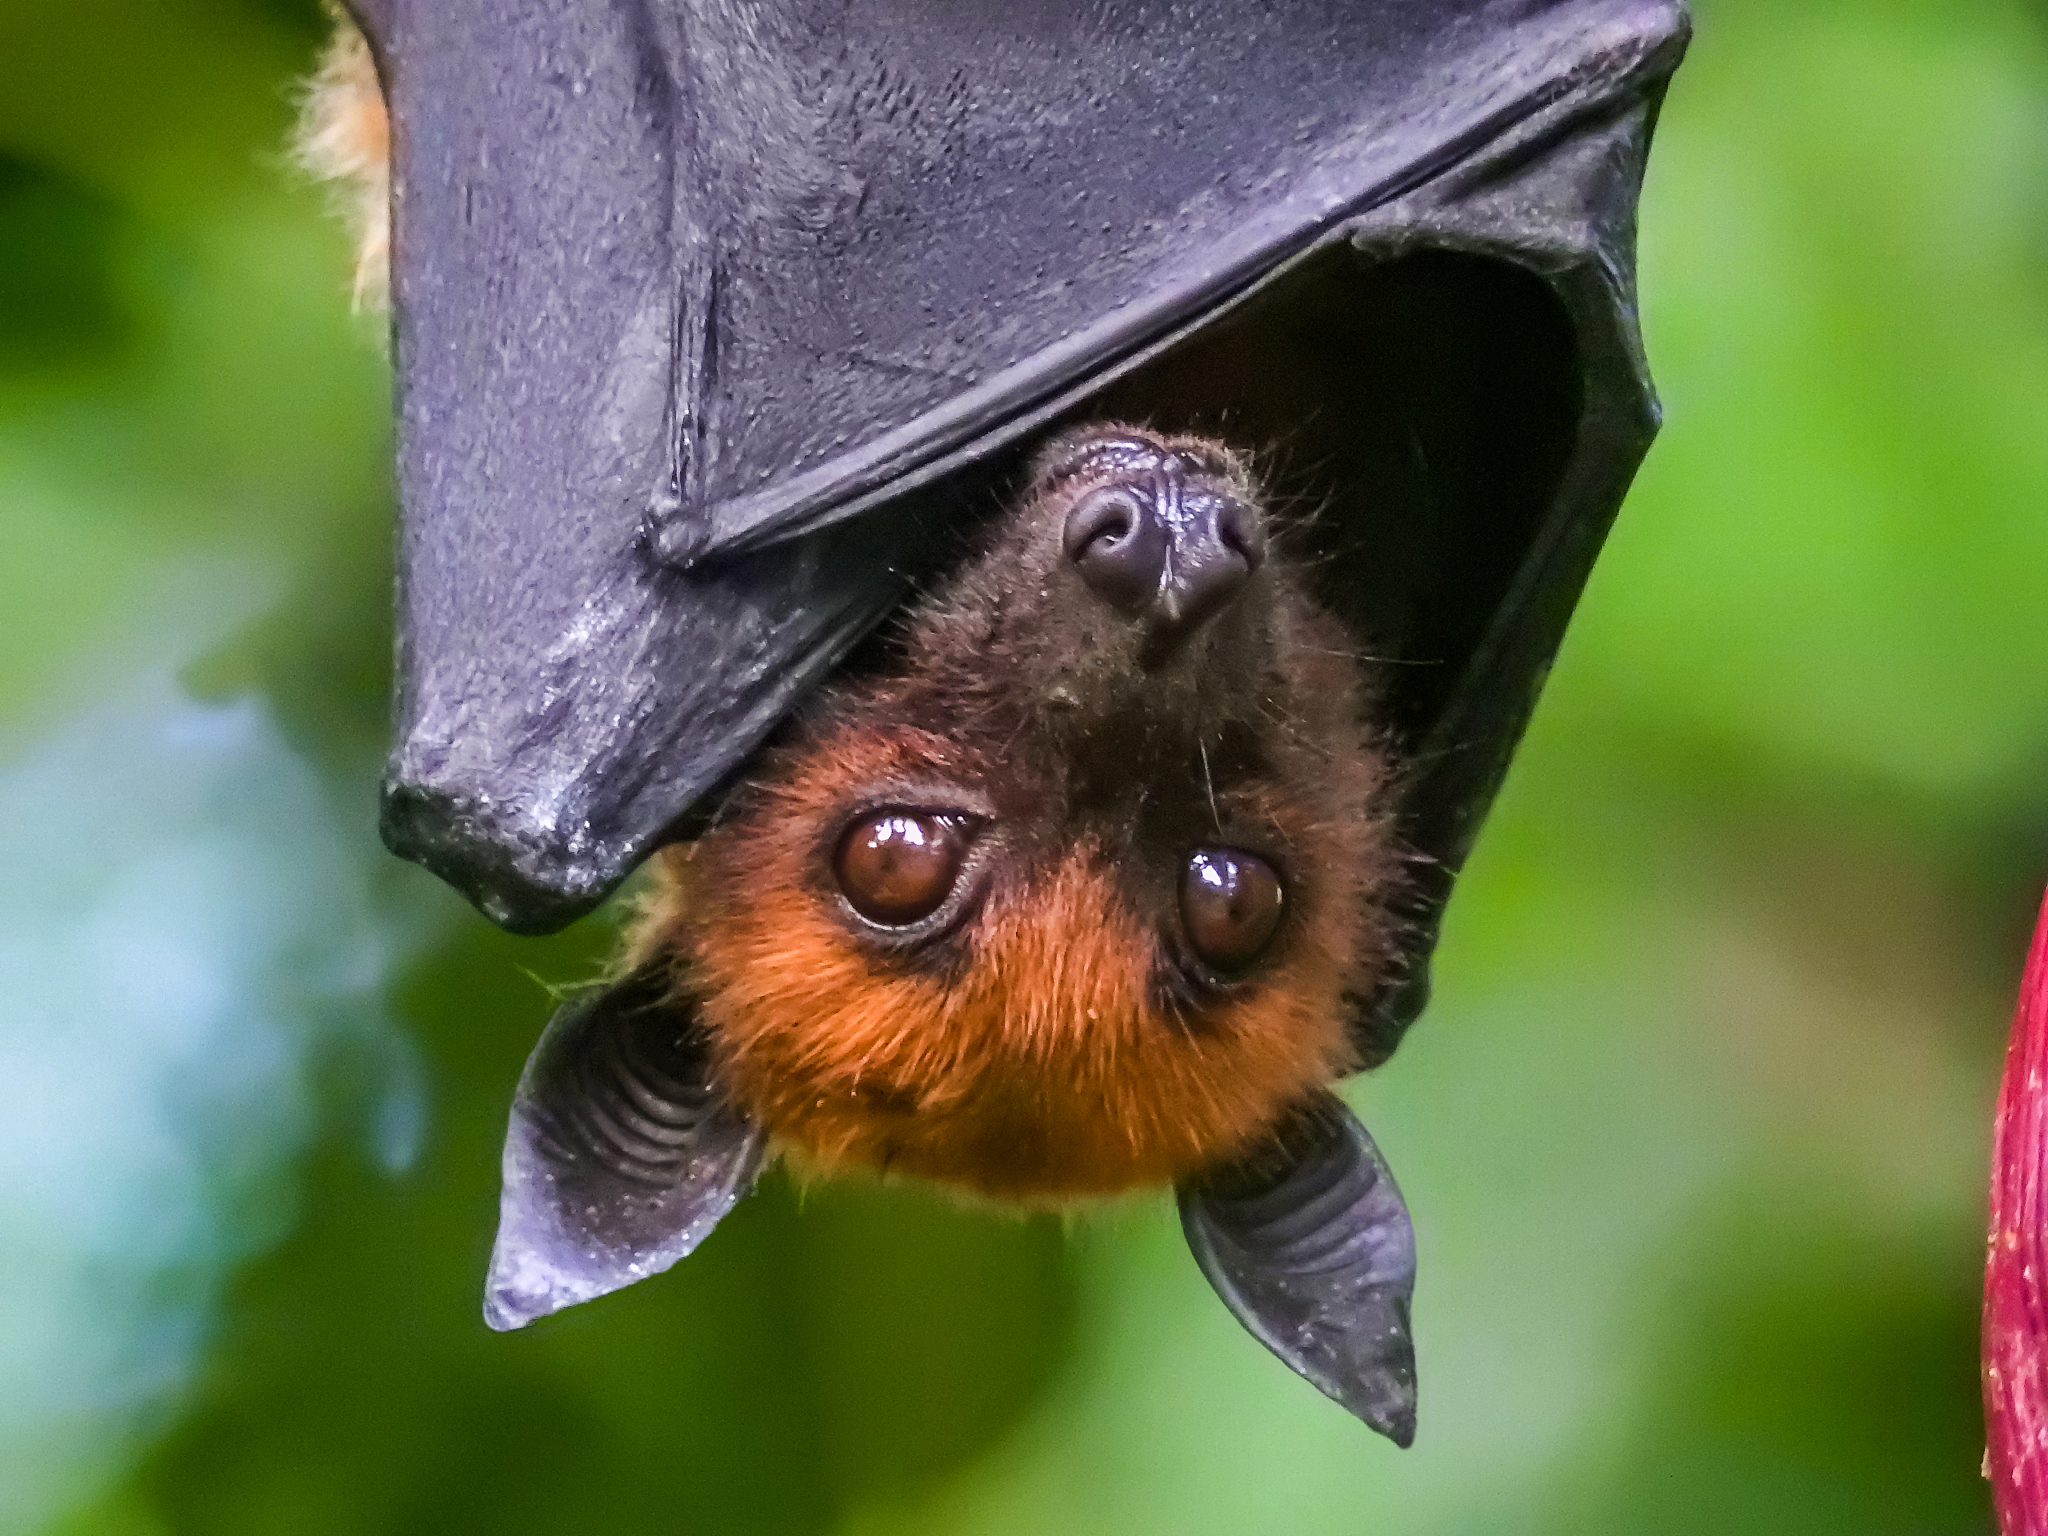 Israeli researchers discovered that wild bats possess high cognitive abilities once thought to be unique to humans. /CFP